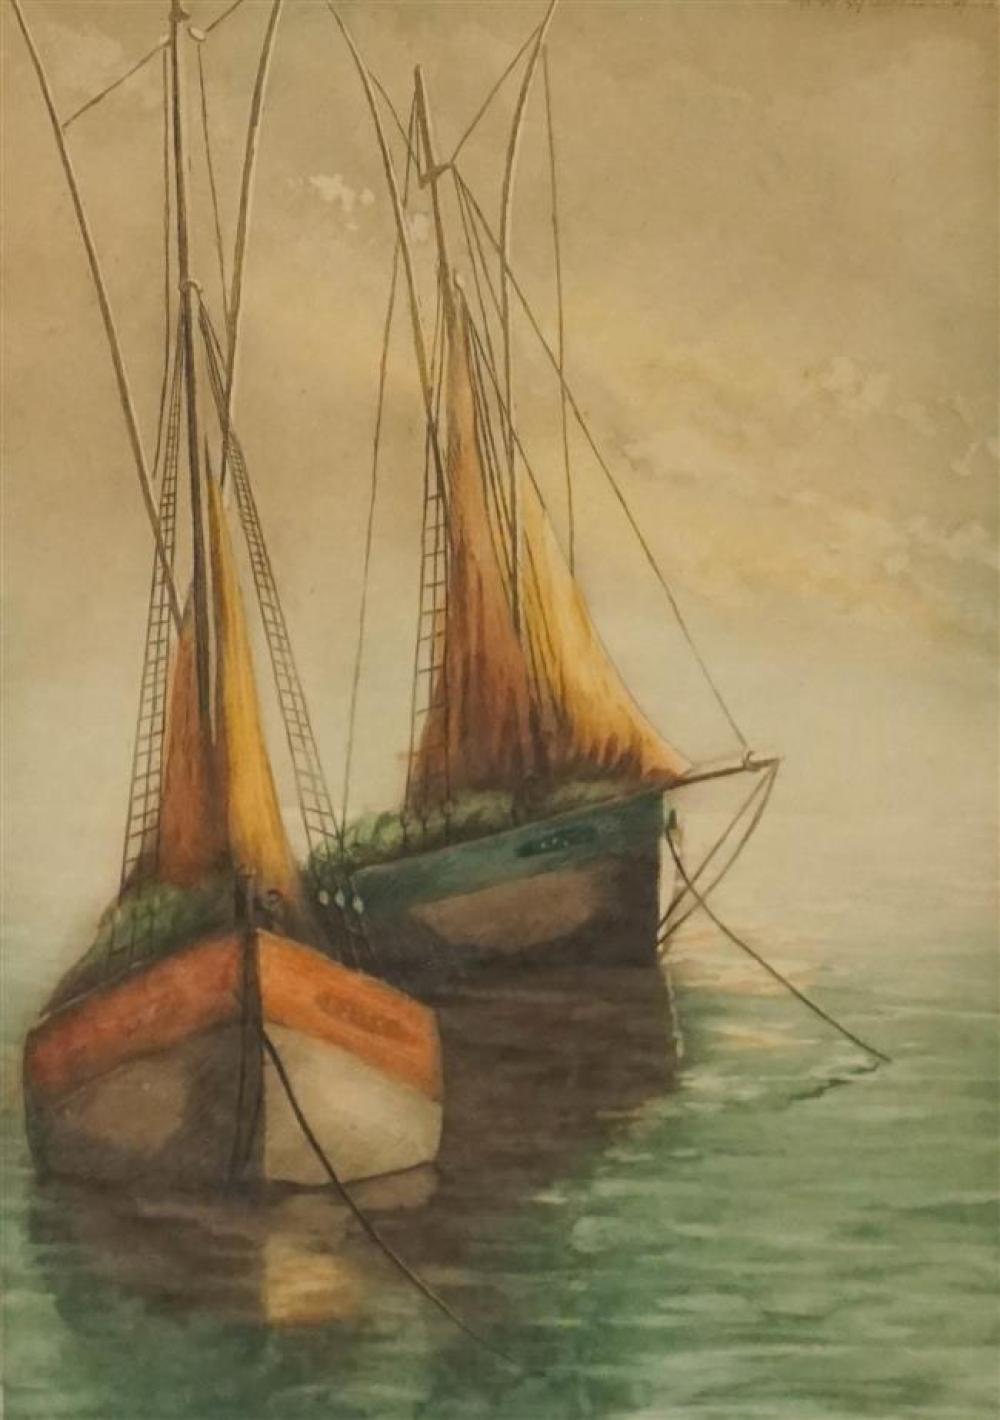 JULES LES THORRIERS, HAND-COLORED